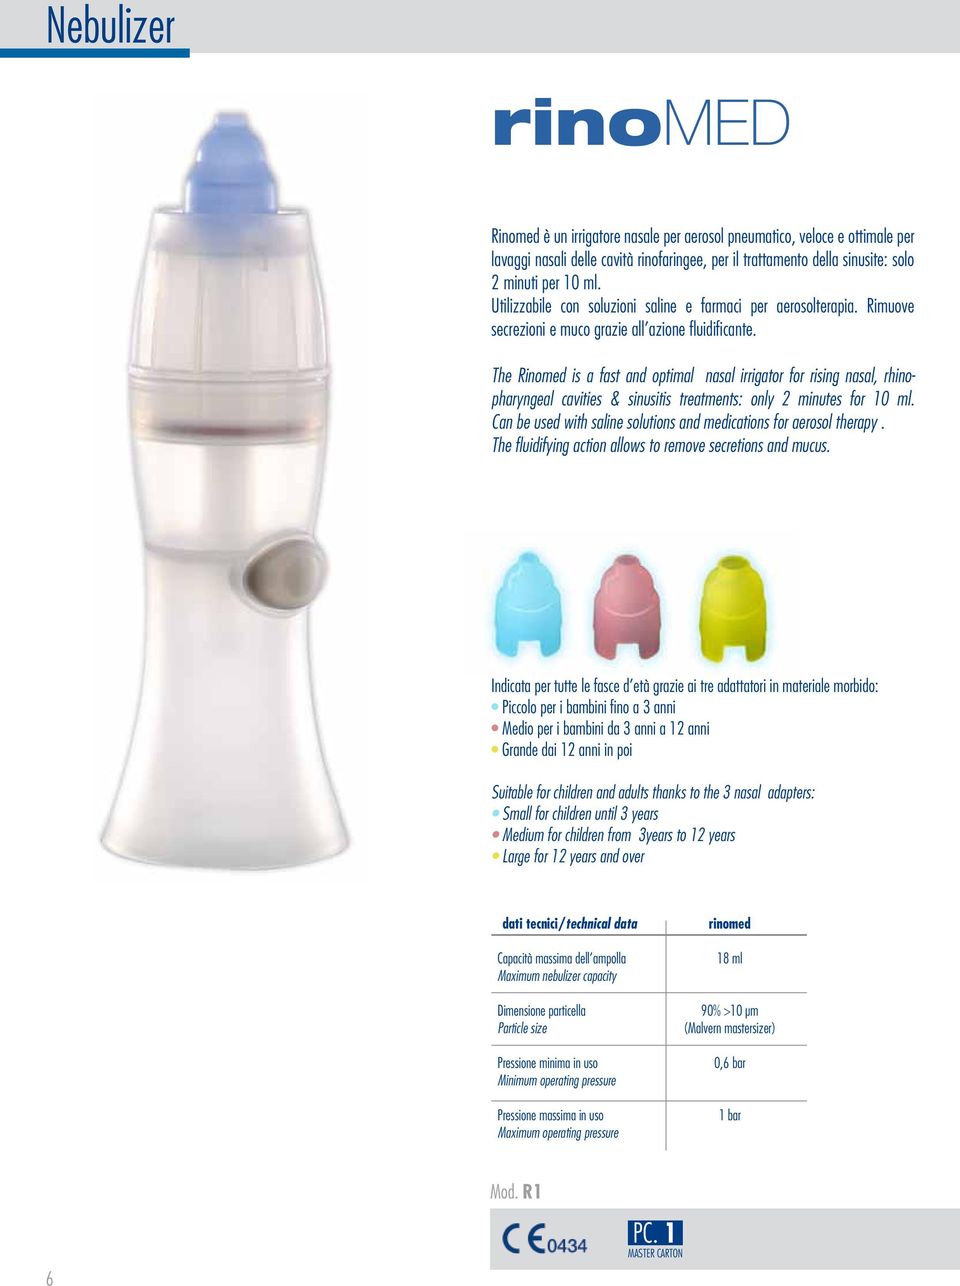 The Rinomed is a fast and optimal nasal irrigator for rising nasal, rhinopharyngeal cavities & sinusitis treatments: only 2 minutes for 10 ml.